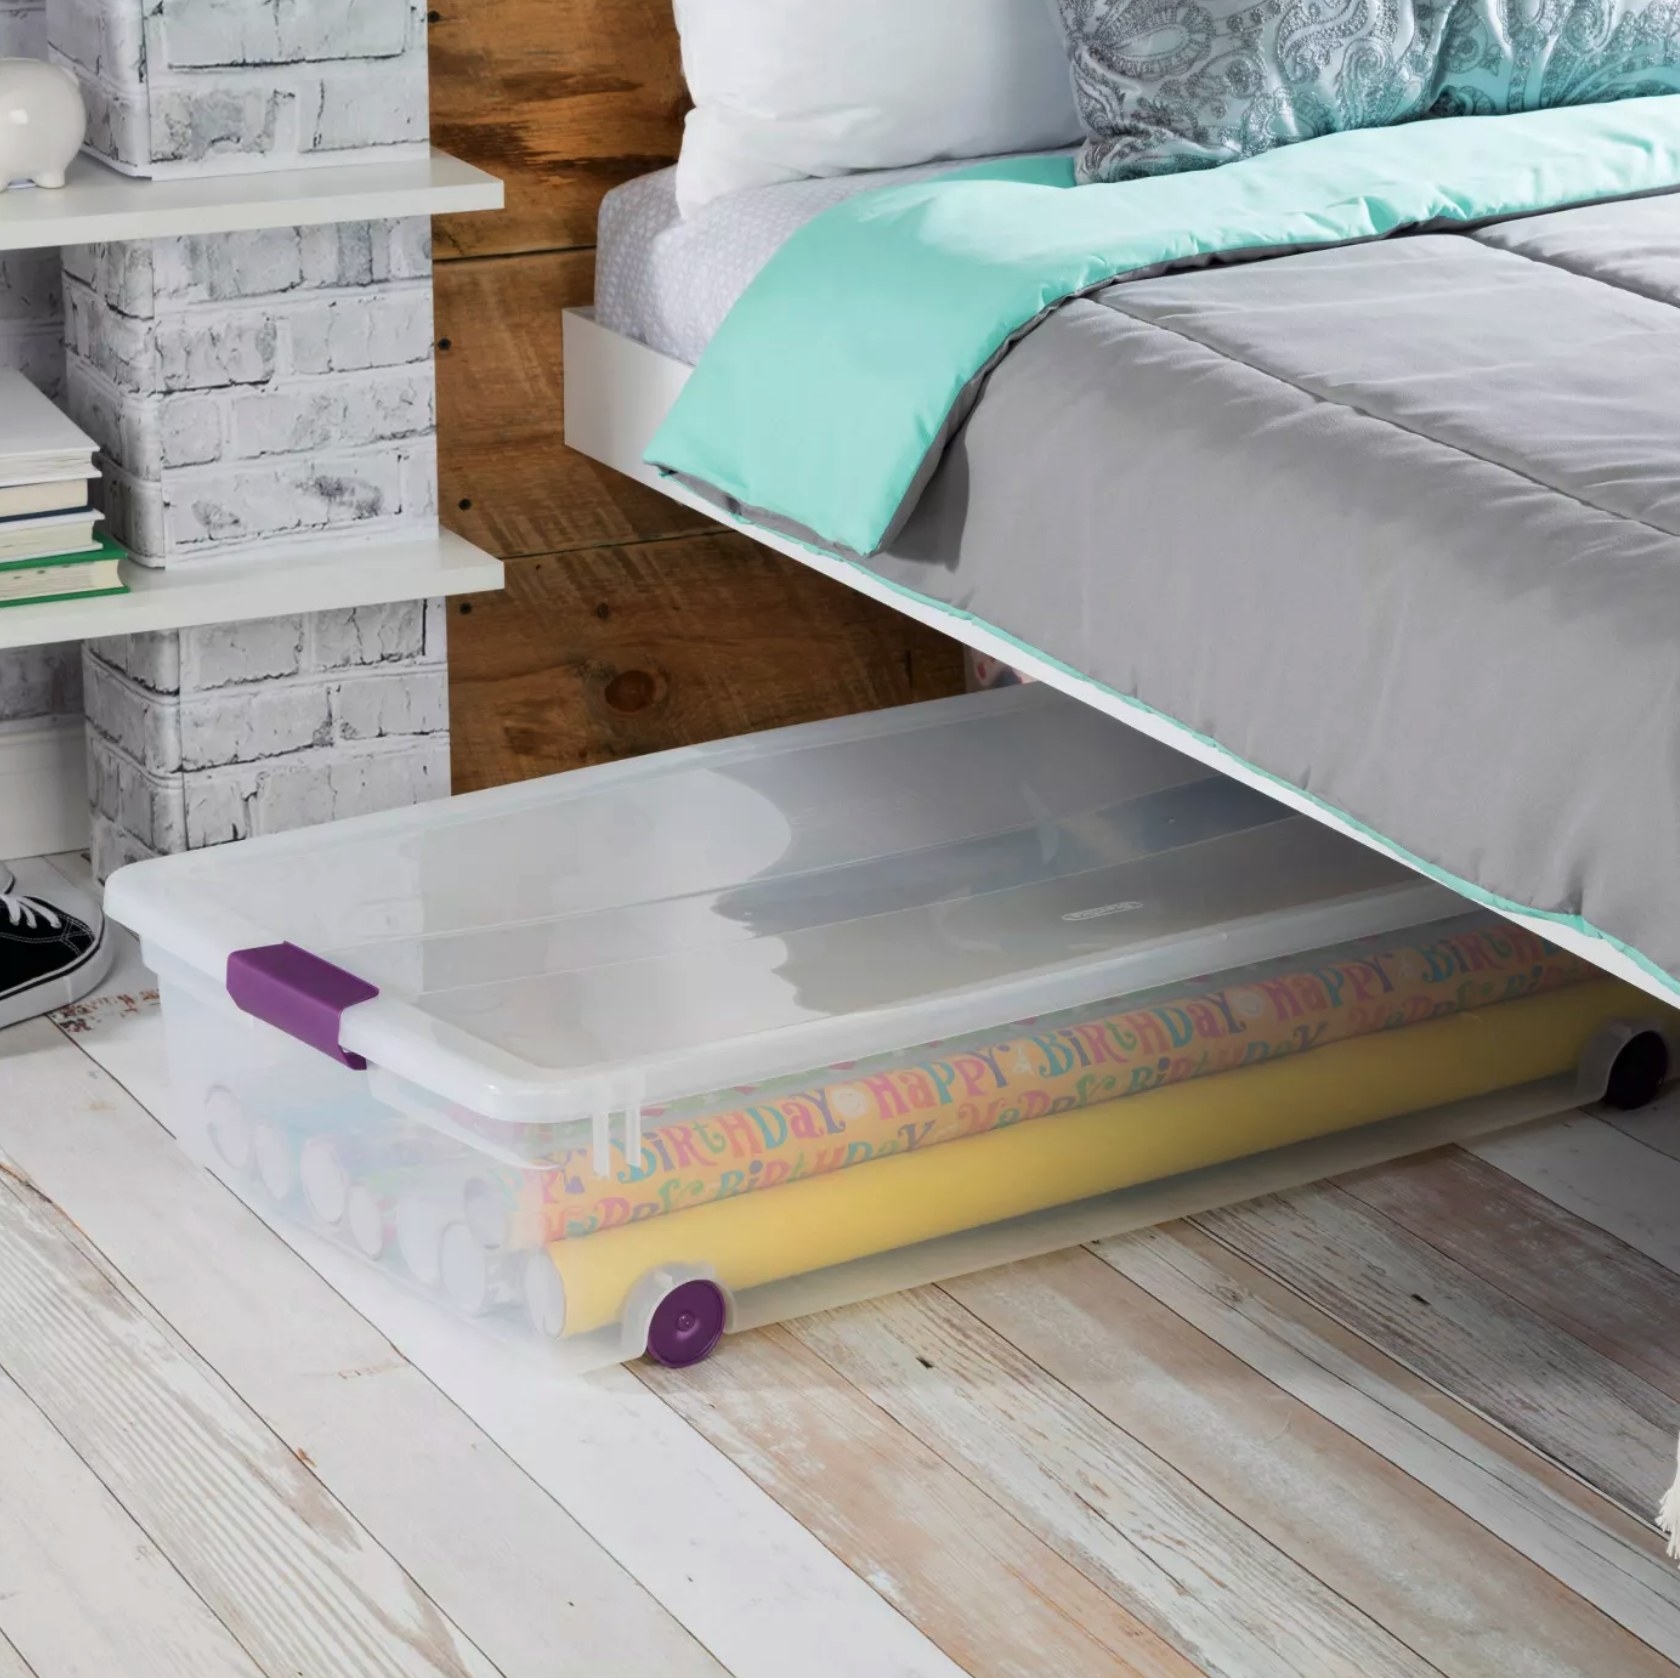 A long, clear plastic bin with purple wheels and latches halfway under a bed. It is holding several rolls of wrapping paper.